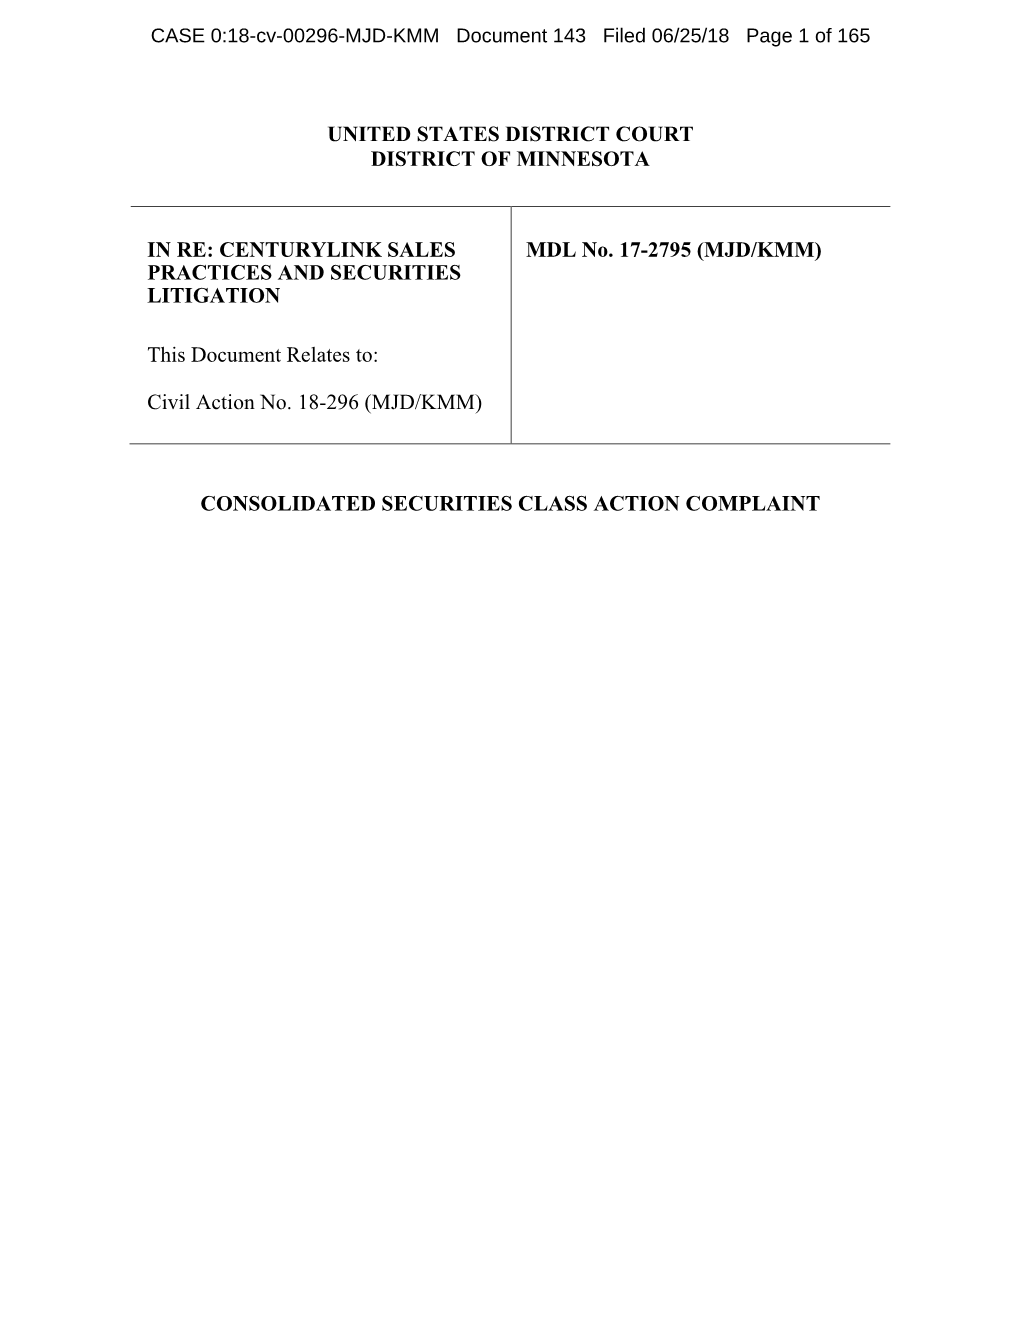 CONSOLIDATED SECURITIES CLASS ACTION COMPLAINT CASE 0:18-Cv-00296-MJD-KMM Document 143 Filed 06/25/18 Page 2 of 165